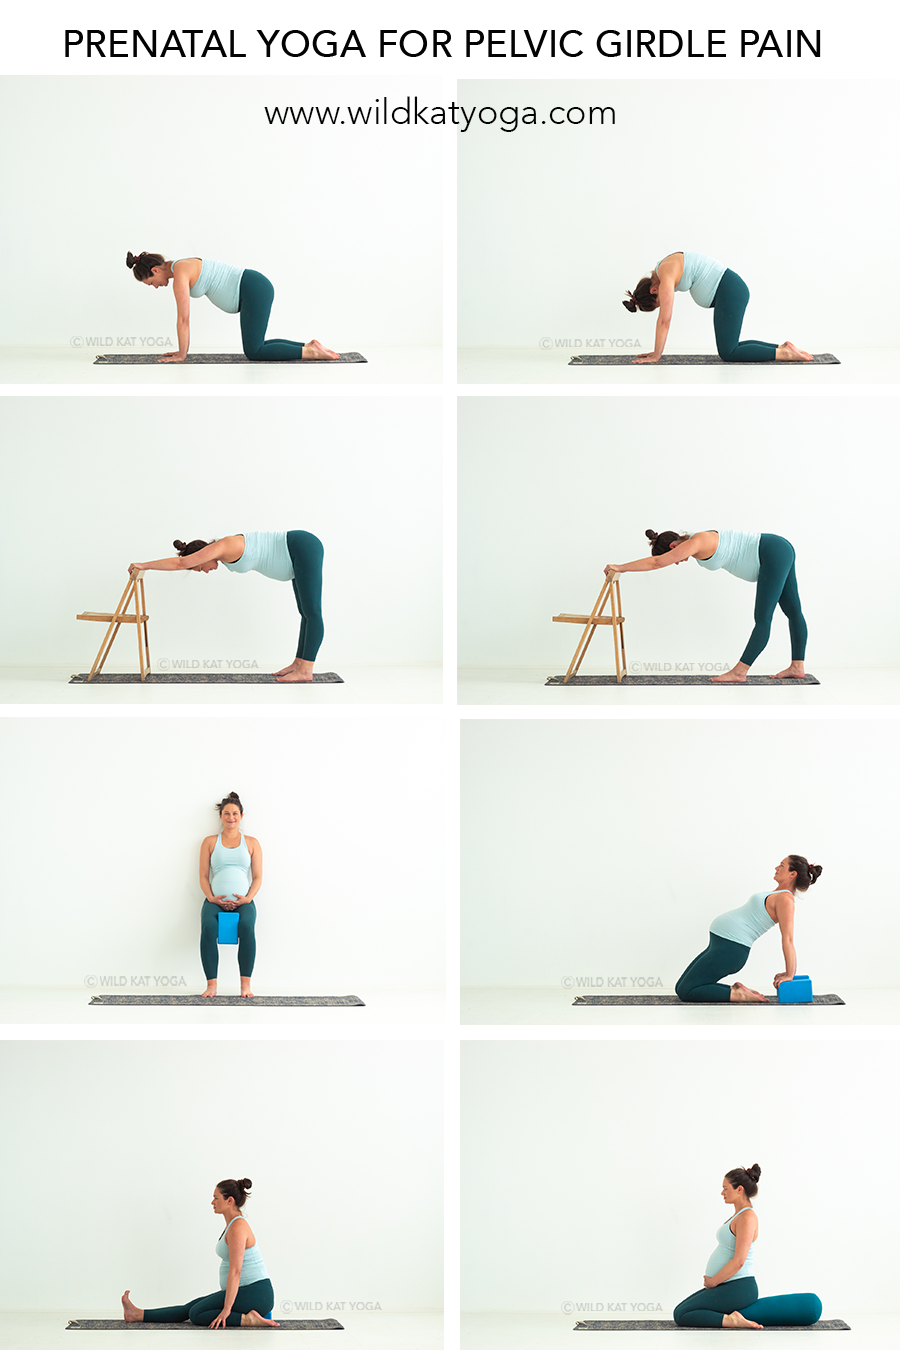 Benefits & Easy to do Yoga Poses for Vaginal Delivery